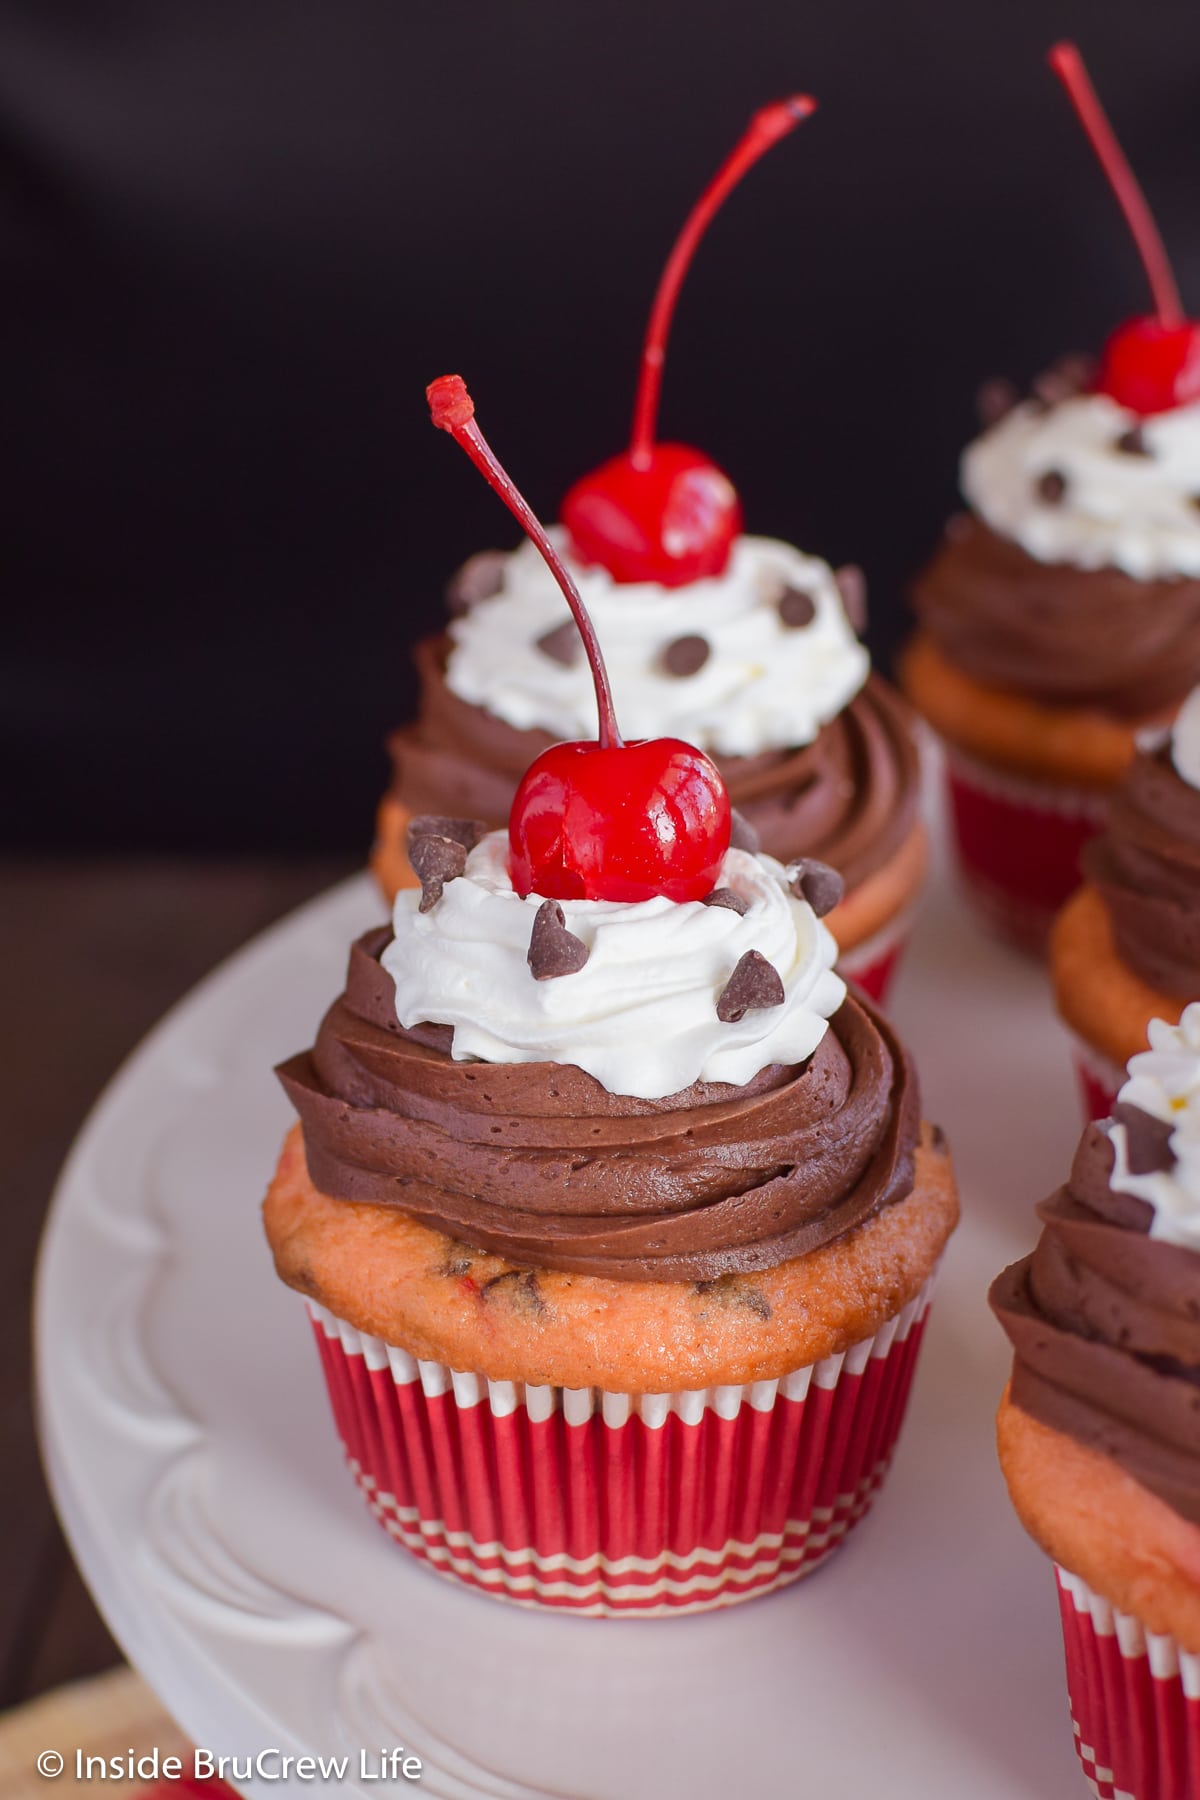 Cherry cupcakes topped with frosting and cherries on a cake plate.